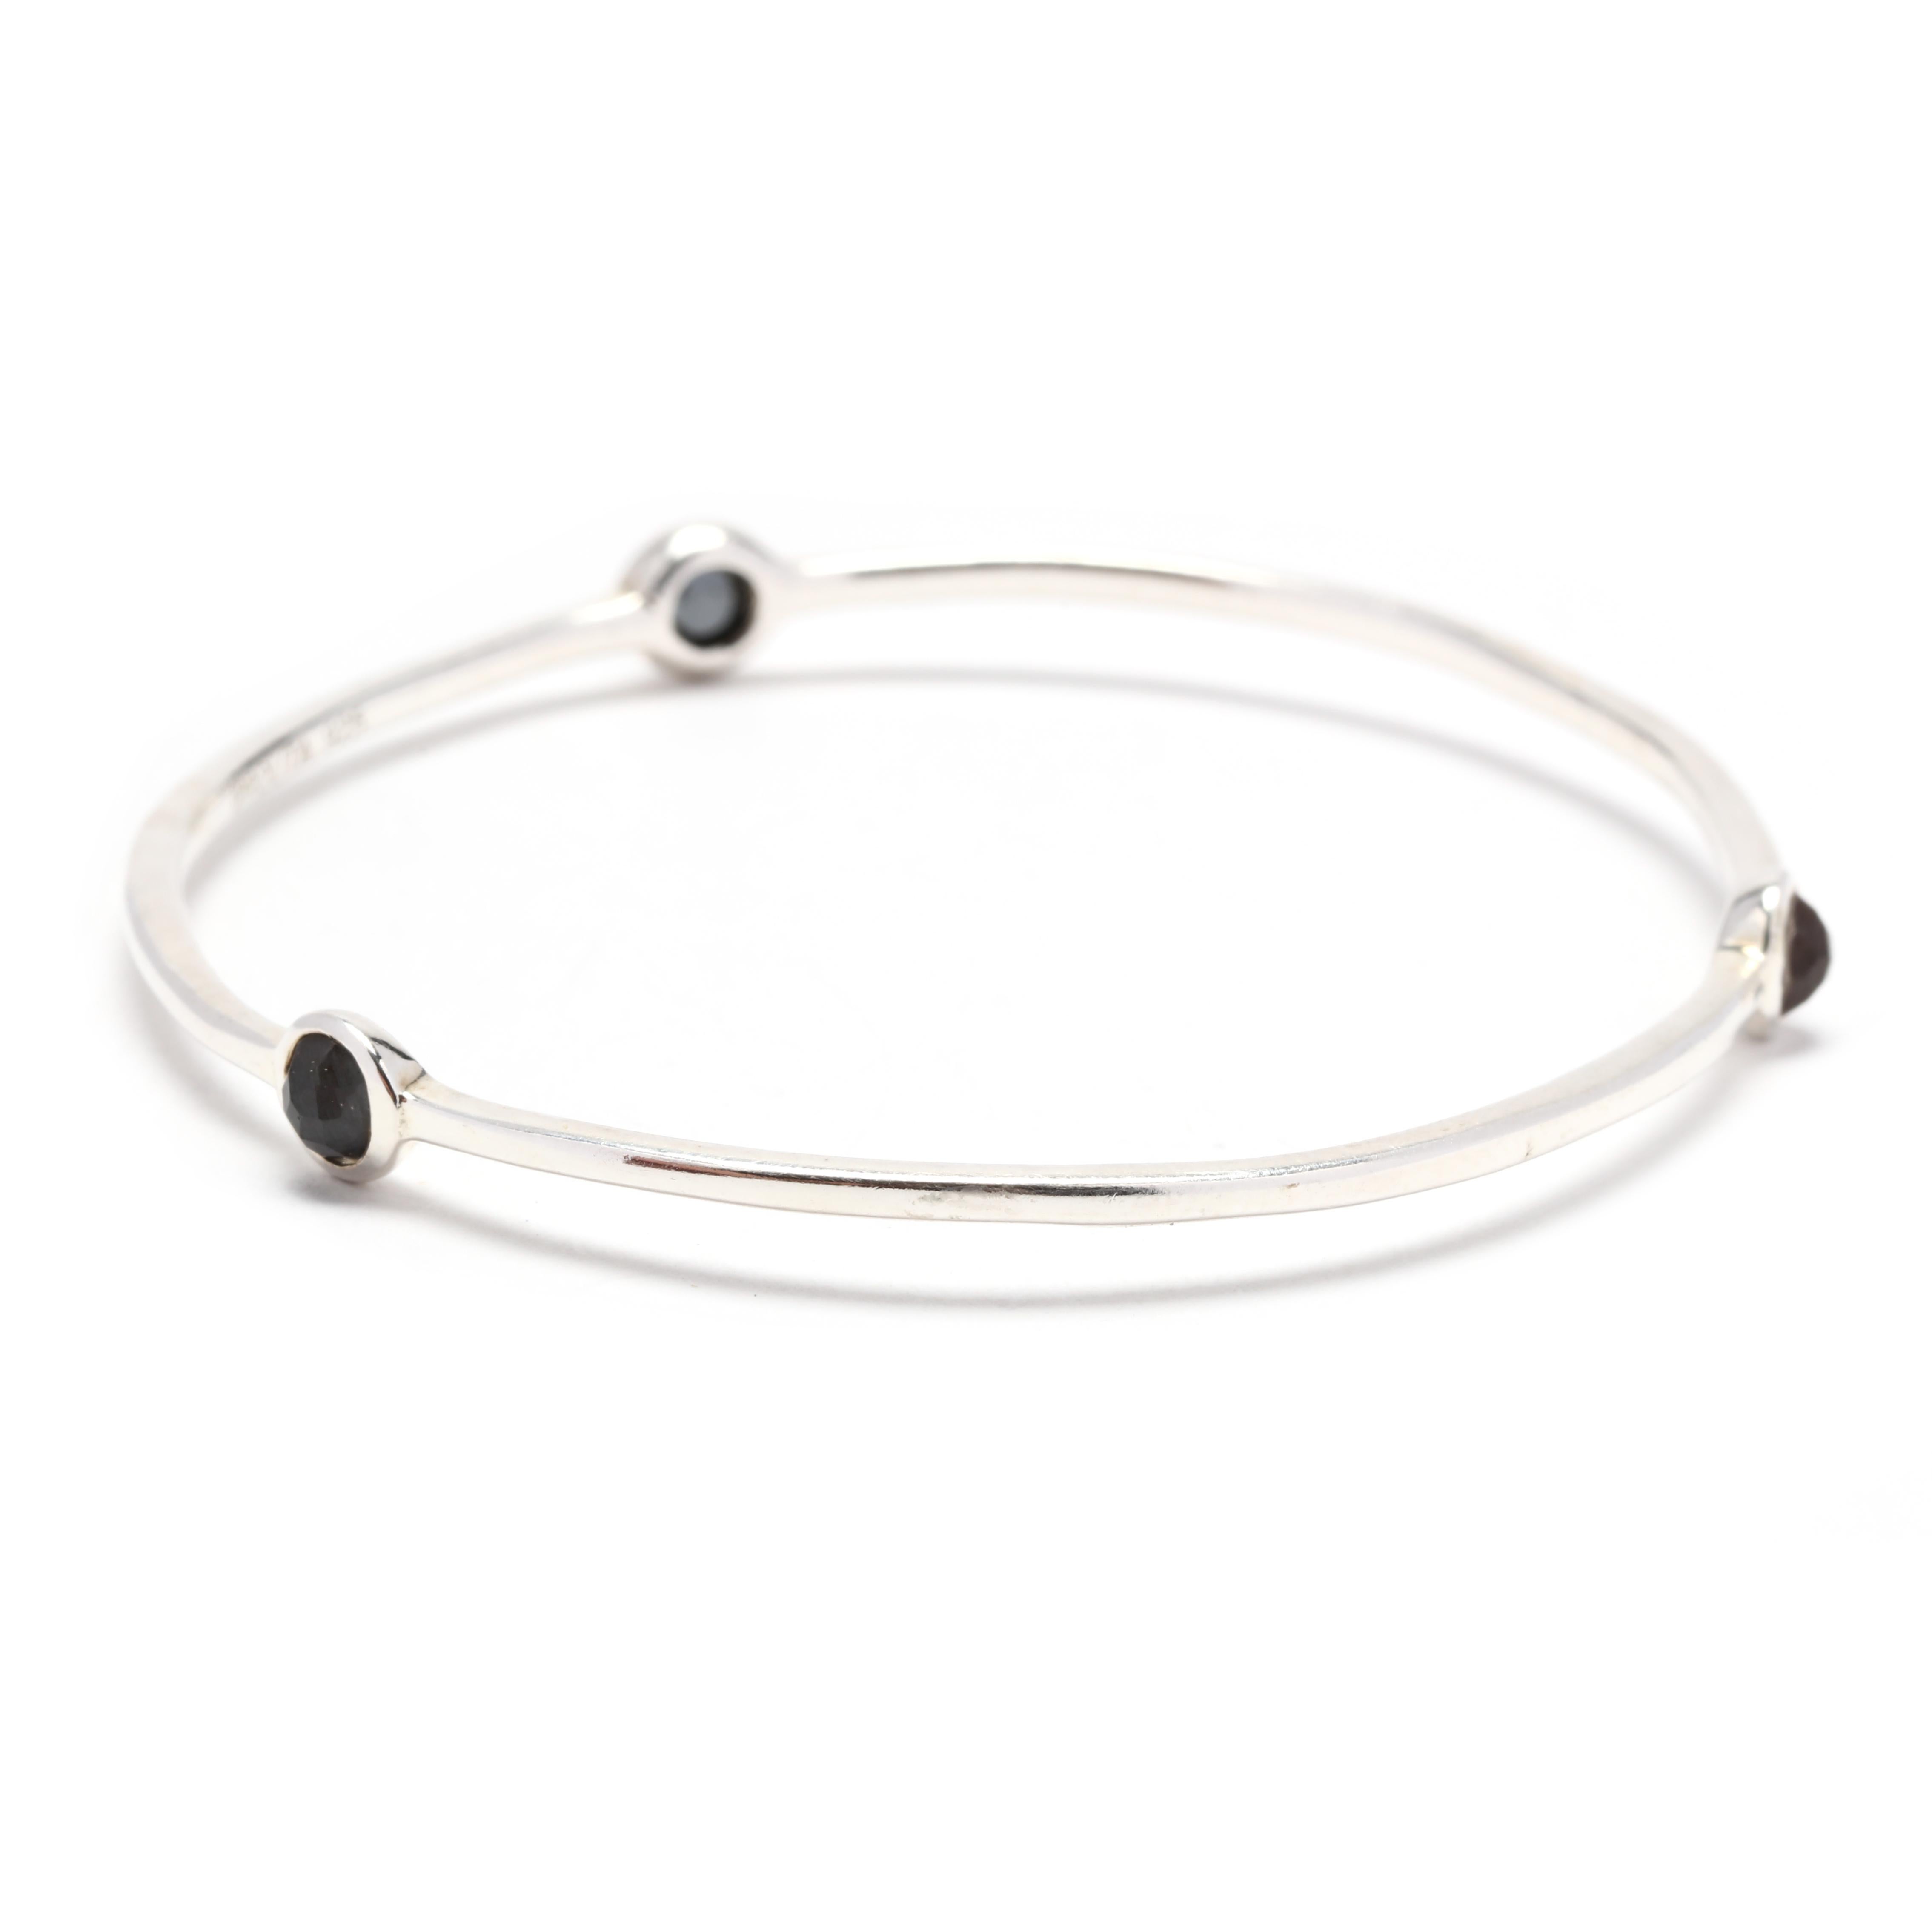 This Ippolita Rock Candy Hematite Bangle Bracelet is a stunning and unique accessory. Made from high-quality sterling silver, this bangle bracelet features a beautiful hematite gemstone that adds a touch of elegance to any